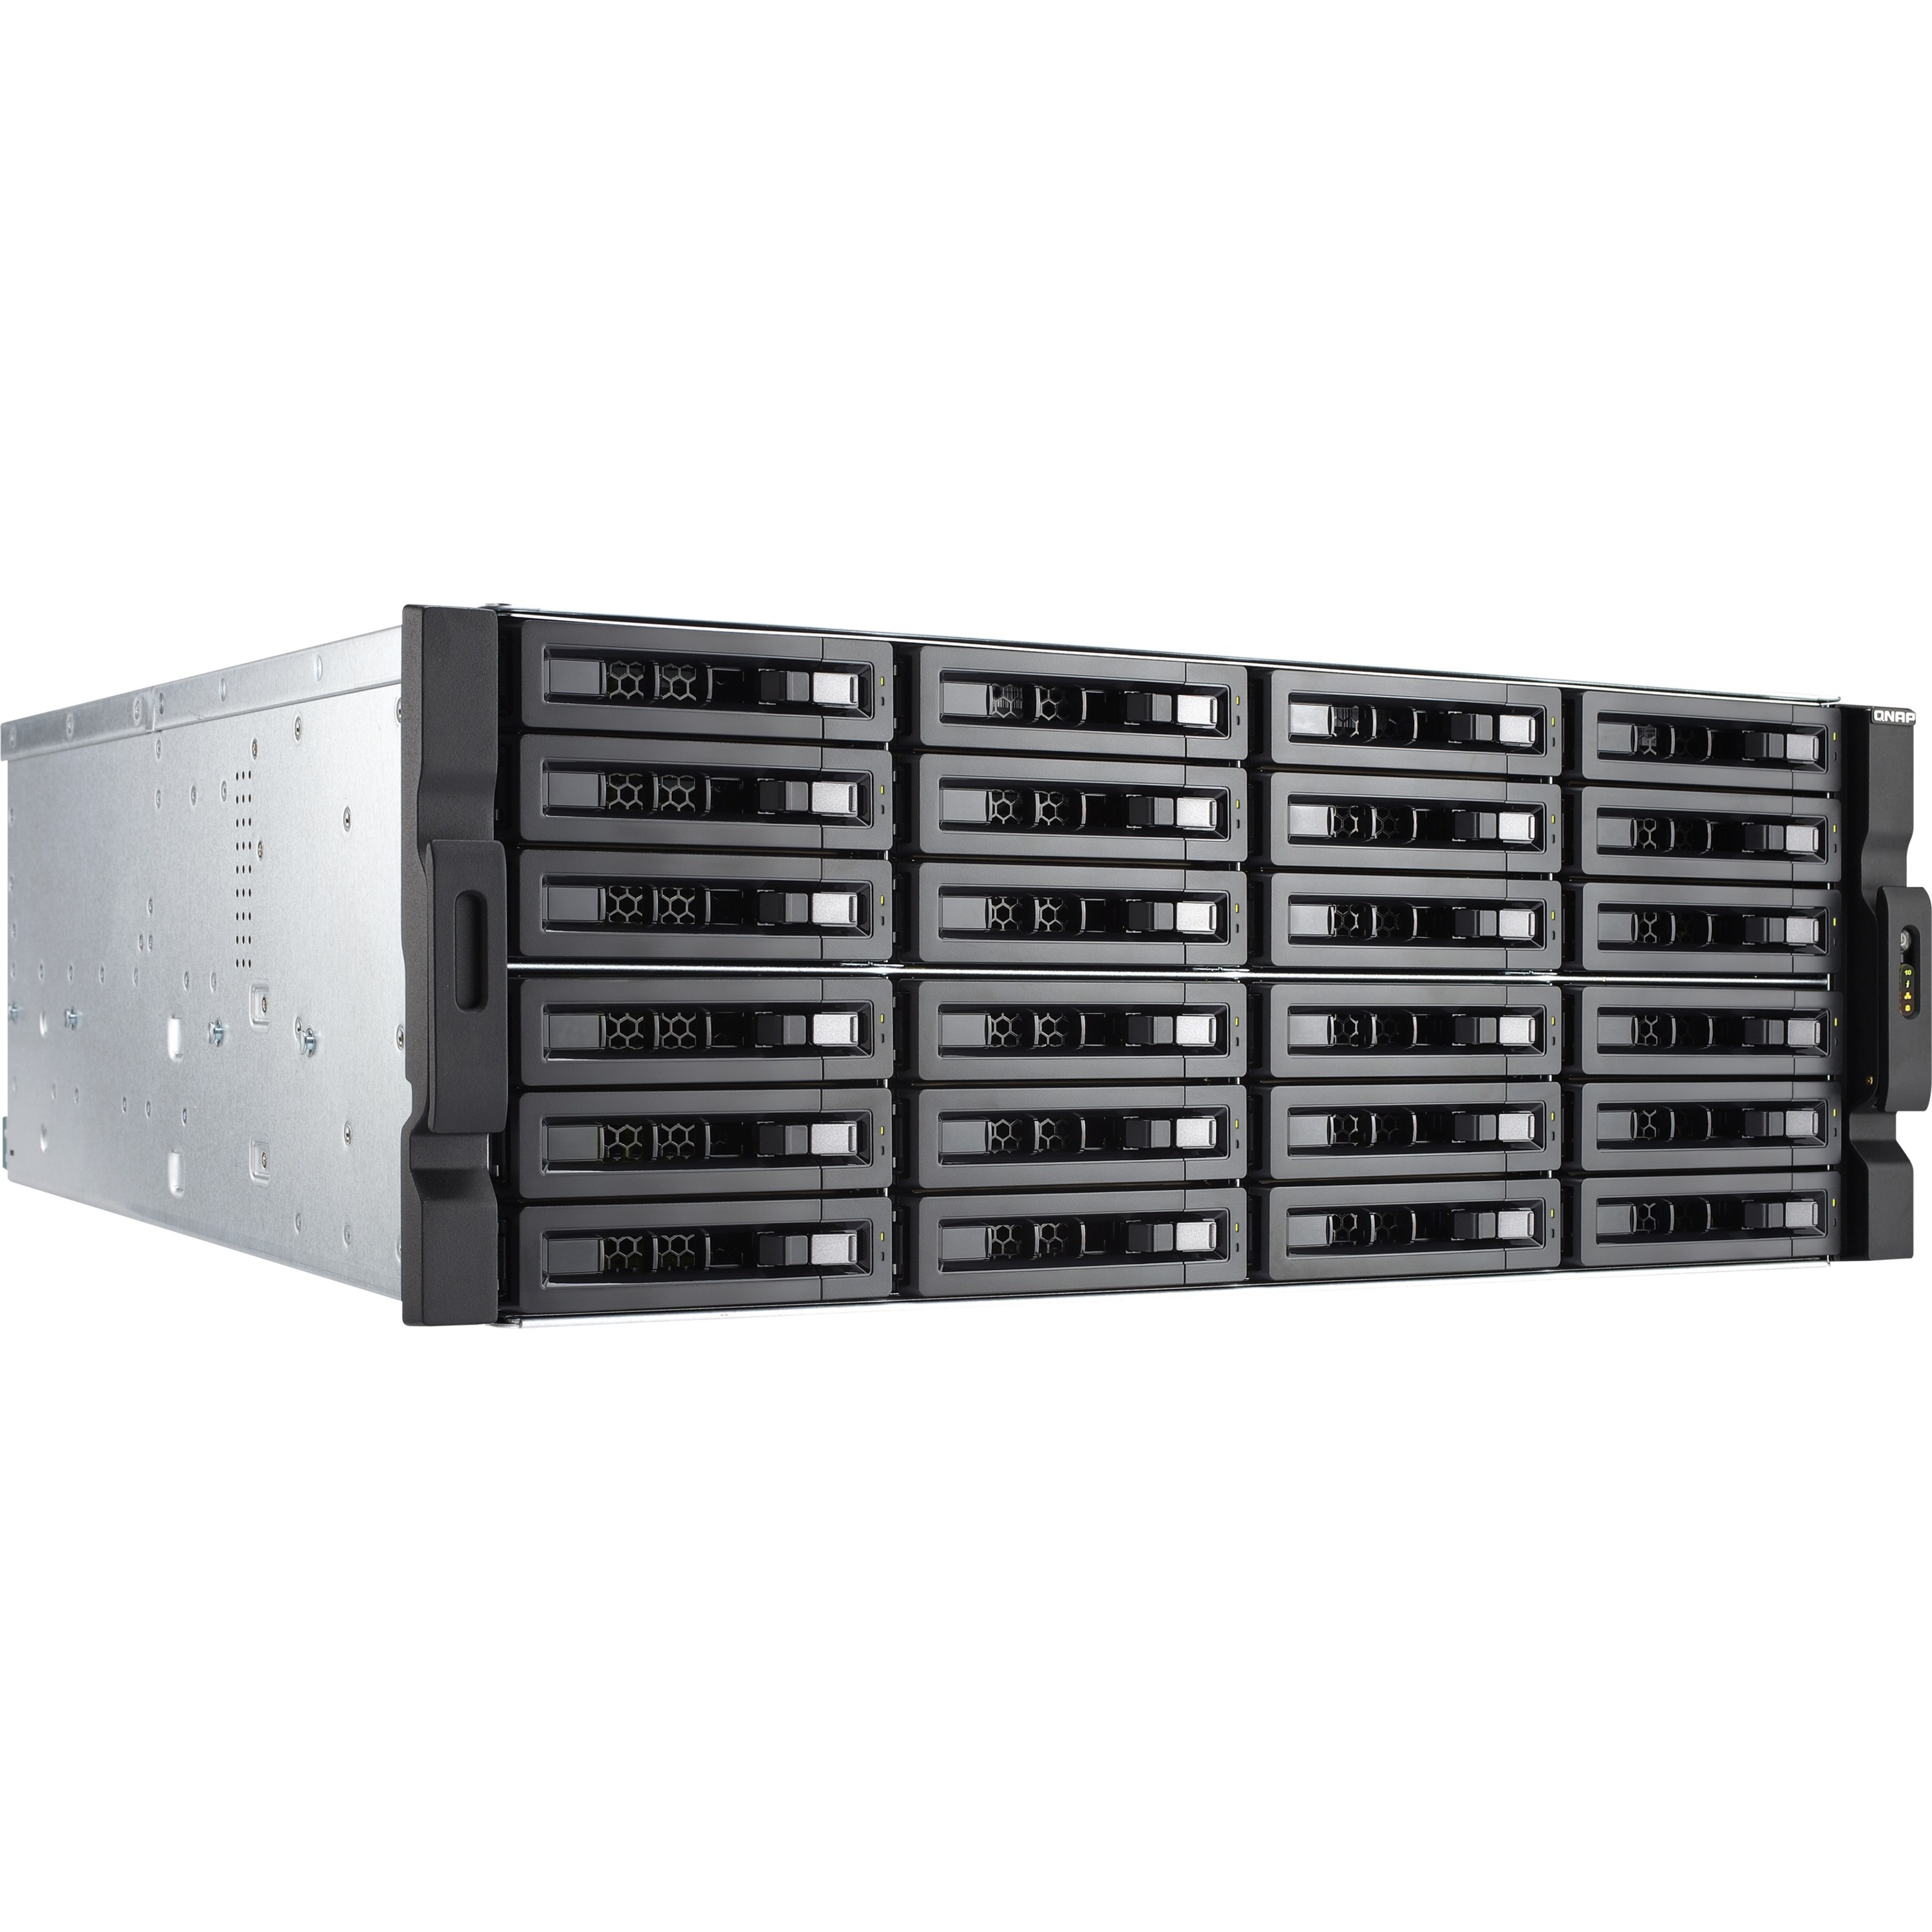 QNAP 24-bay 12Gbps SAS-enabled High-performance NAS/iSCSI/IP-SAN Unified Storage